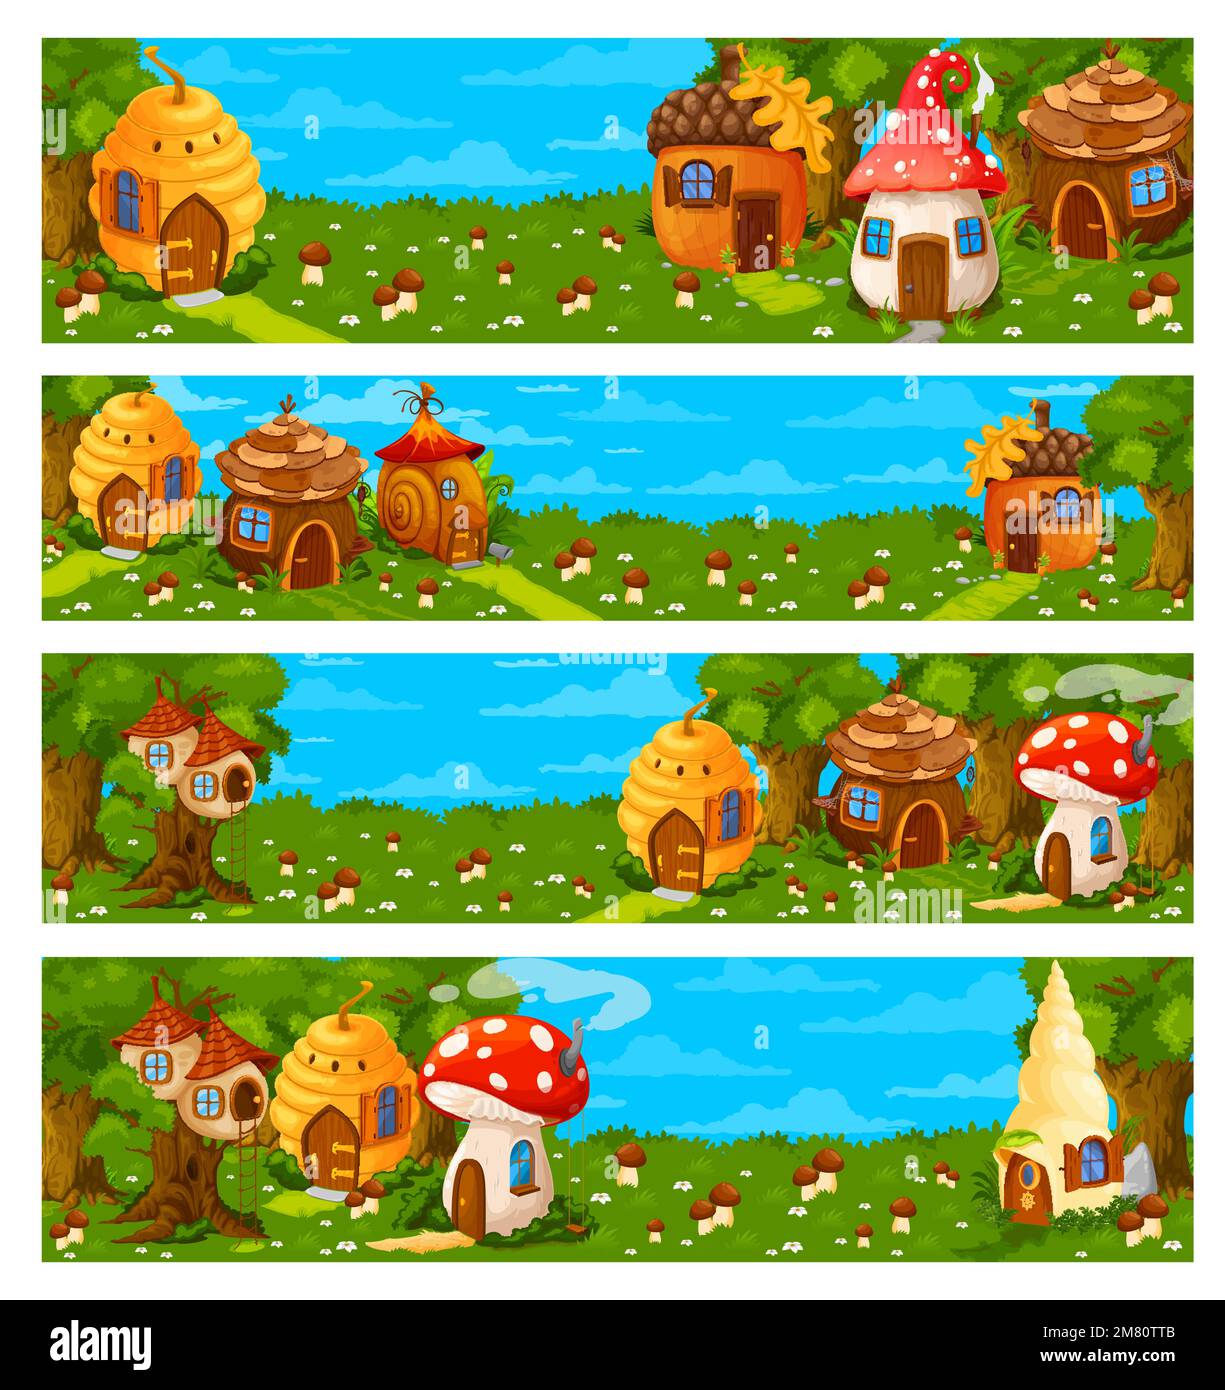 Game level landscape cartoon fairy houses and dwellings. Game level environment vector backgrounds with fairy creature hive, mushroom and snail shell dwellings, hobbit forest house or huts Stock Vector